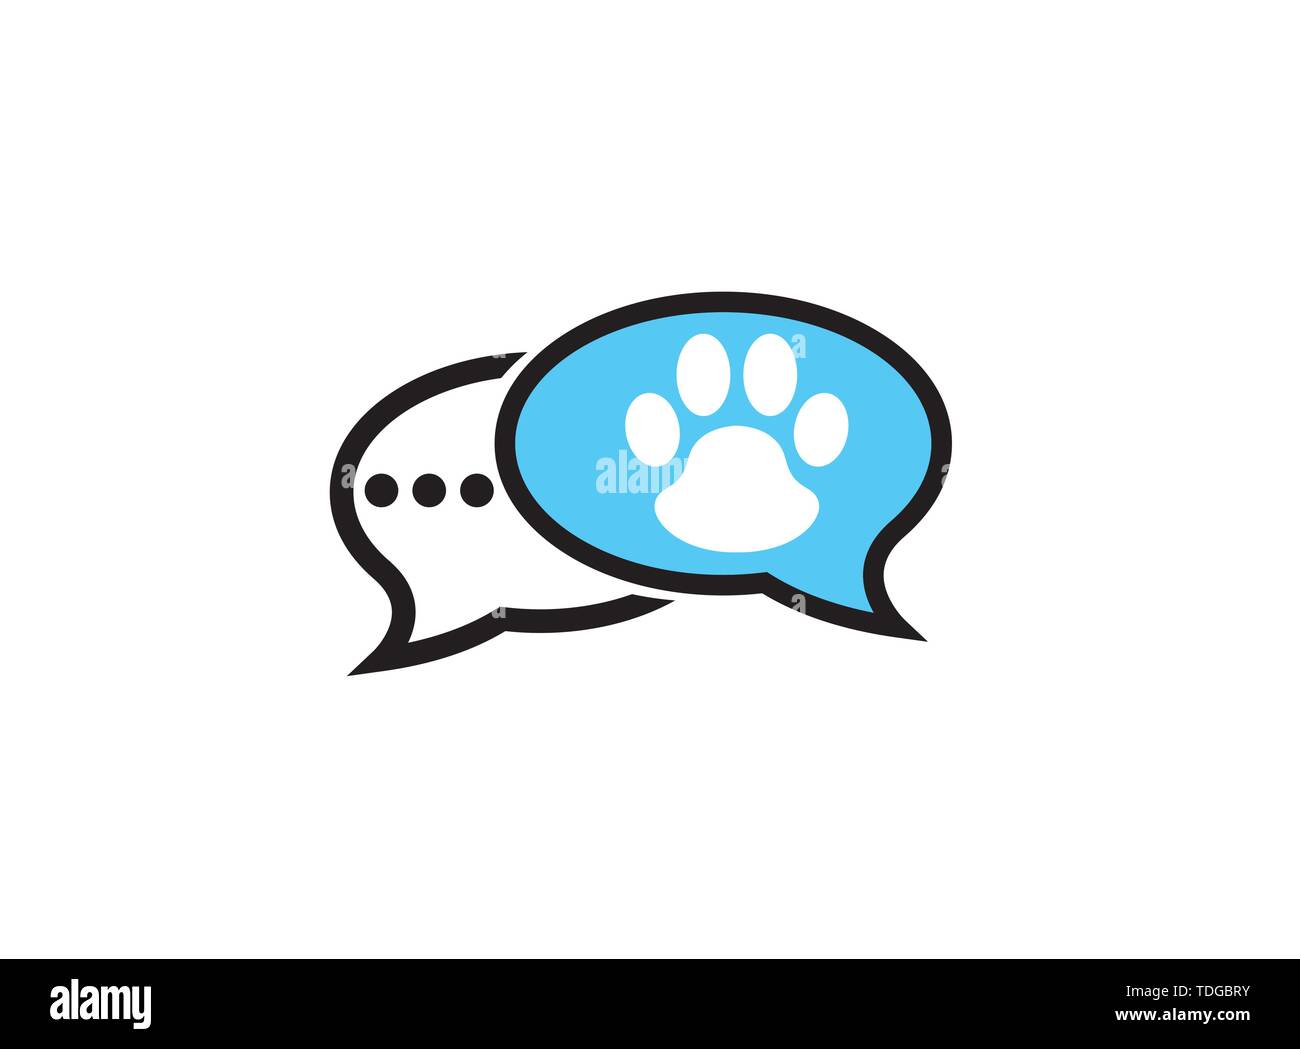 Paw inside an chat icon and footprint symbol logo design illustration in the shape Stock Vector